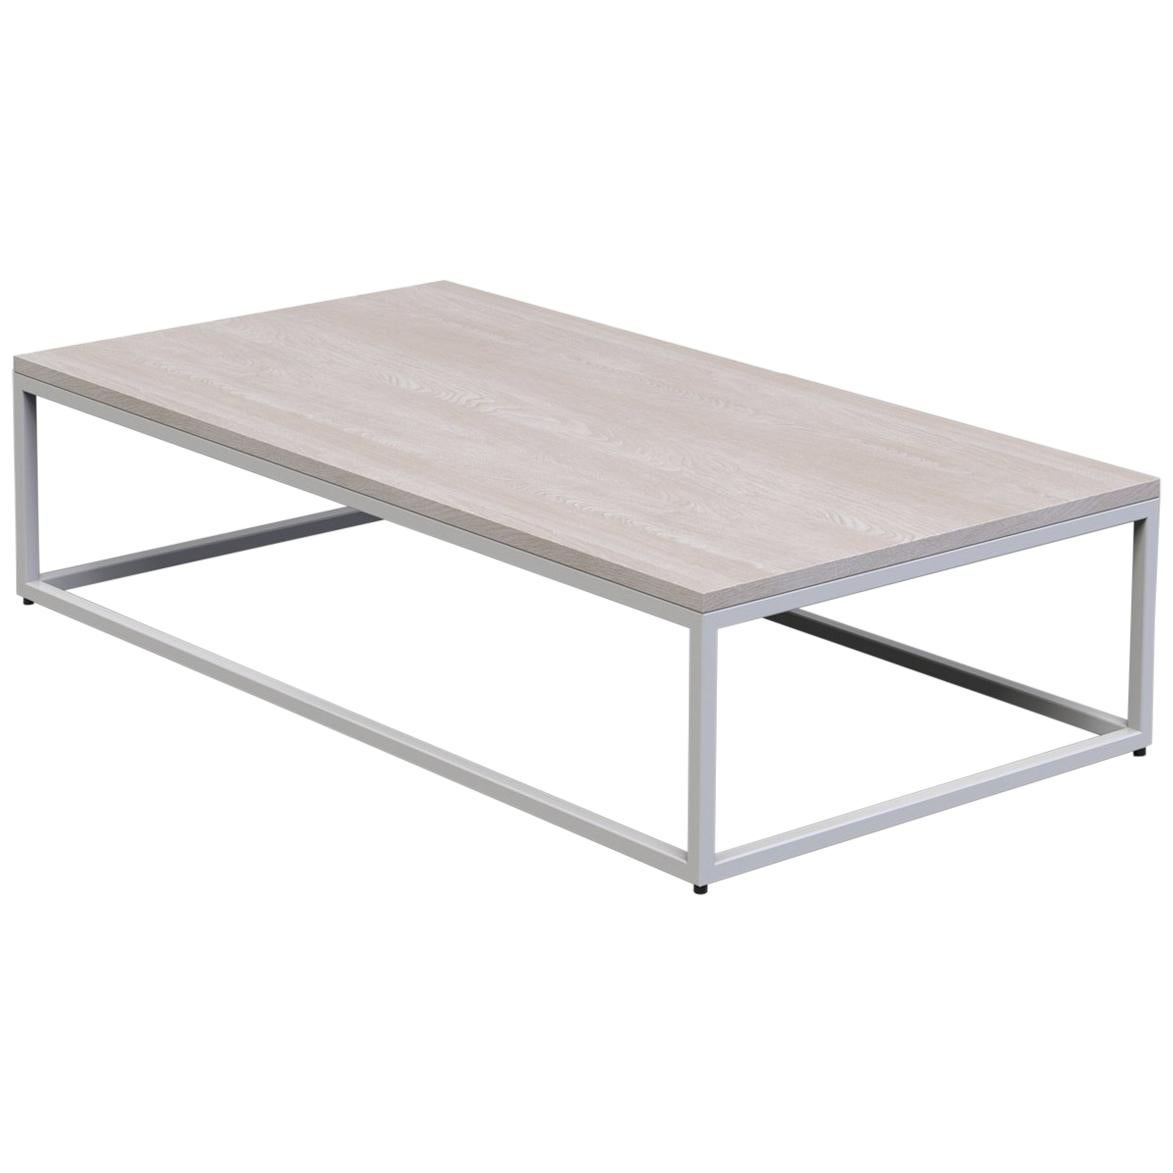 1 x 1 Coffee Table 60", White Washed Ash - IN STOCK